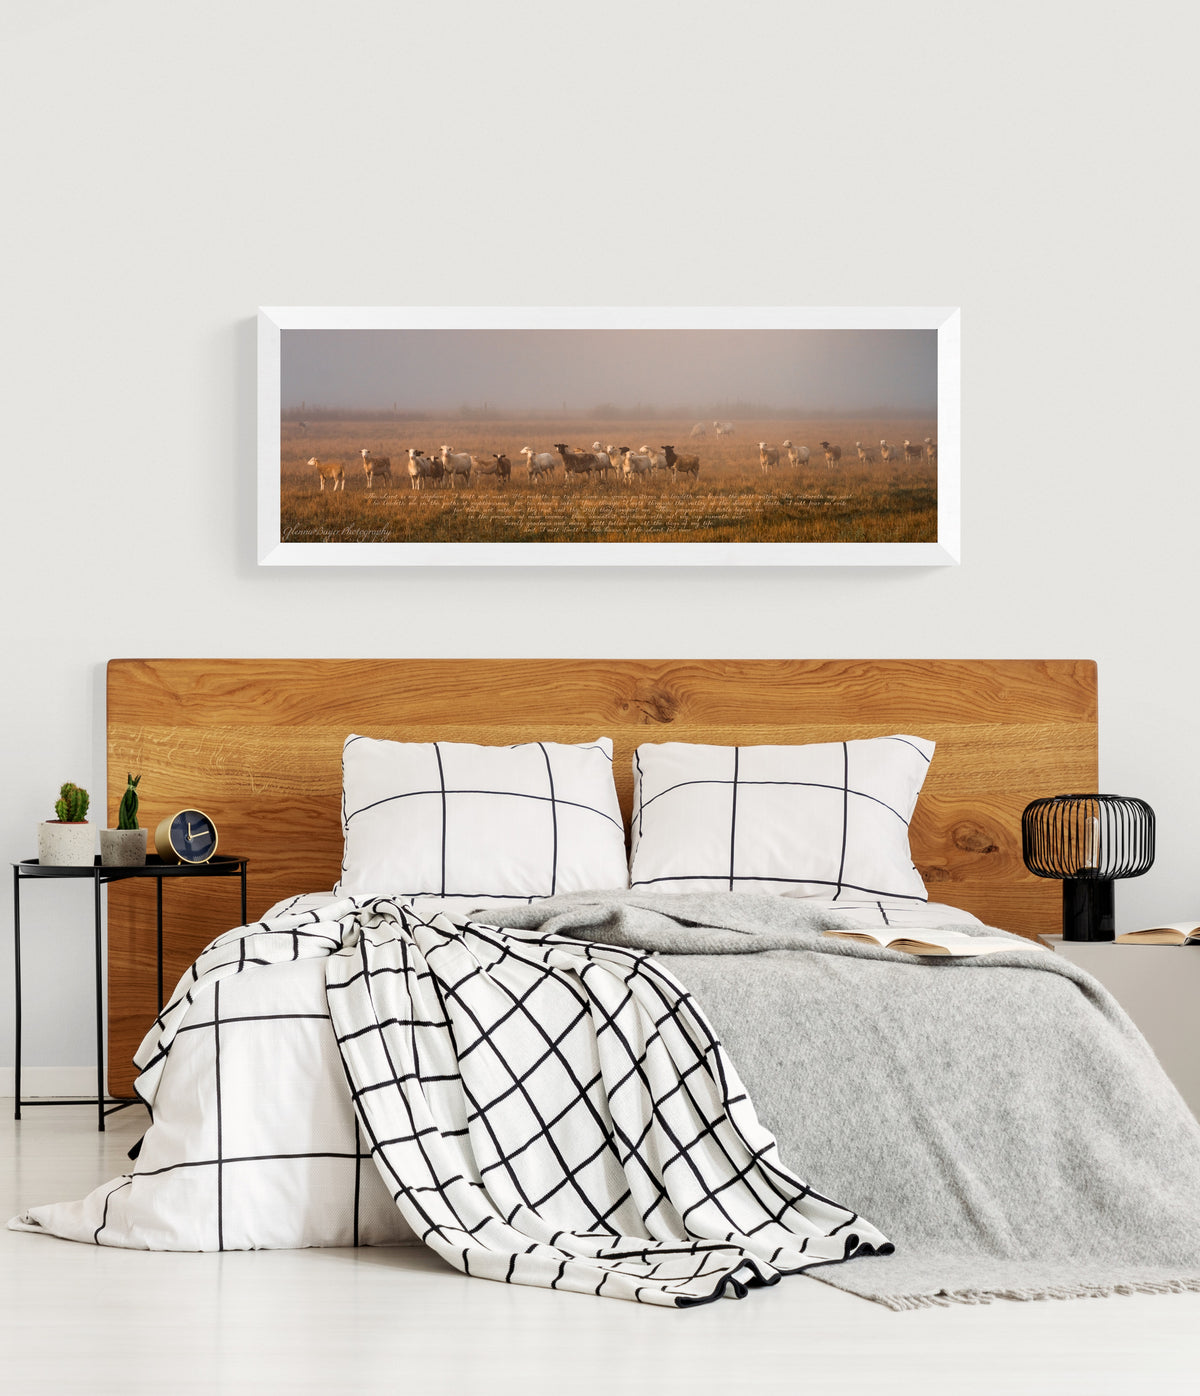 Print displayed on wall in bedroom